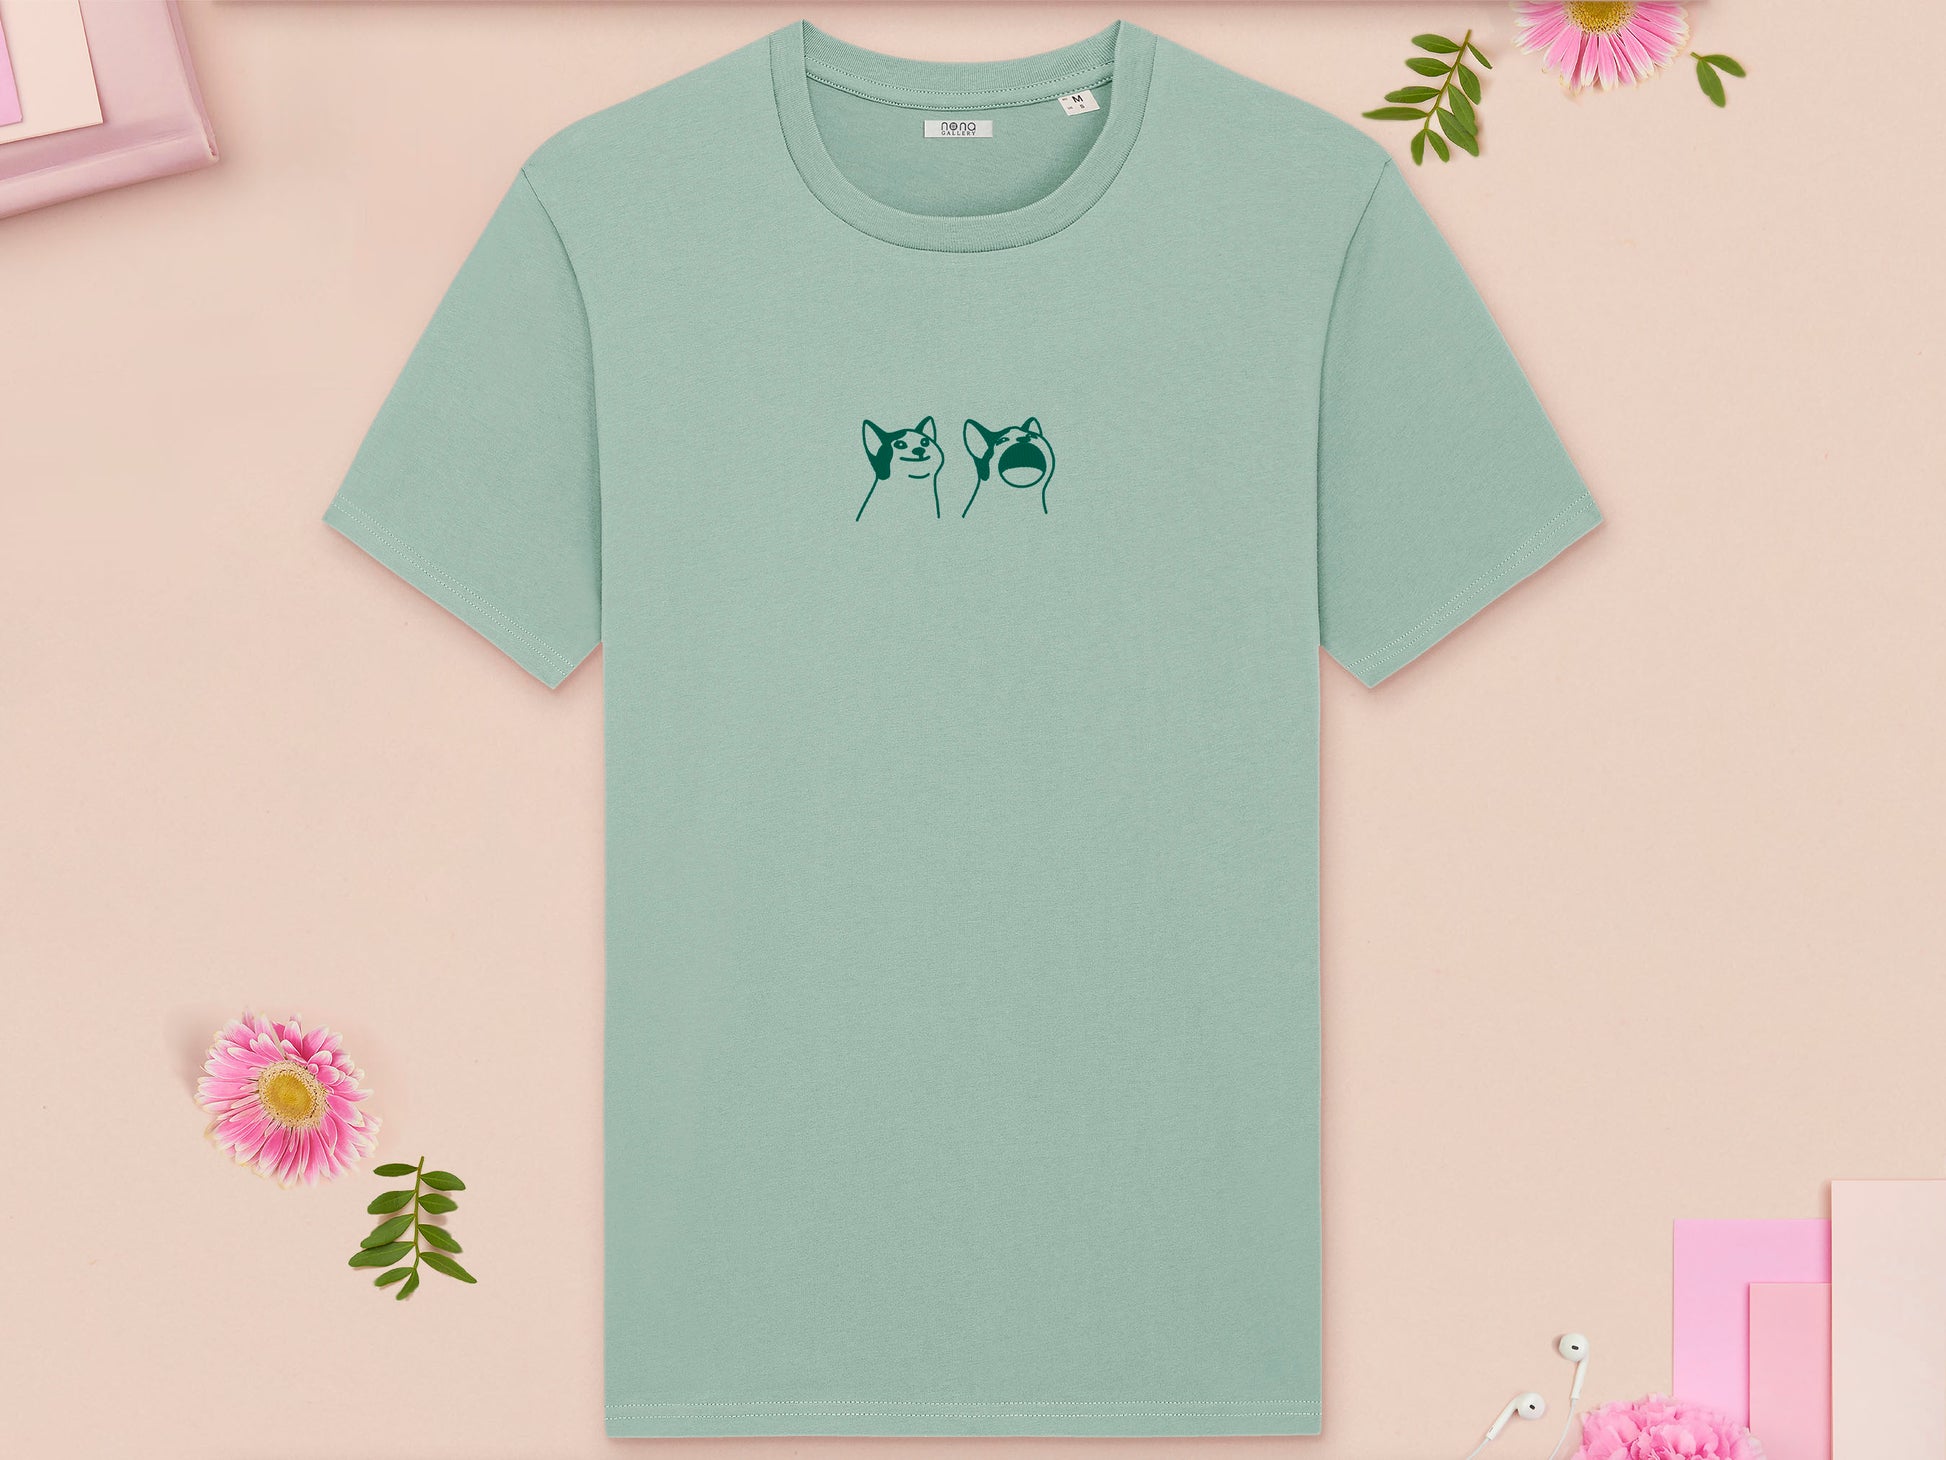 A green crew neck short sleeve t-shirt, with an embroidered green thread design of a cute popcat the cat meme reaction twitch emote